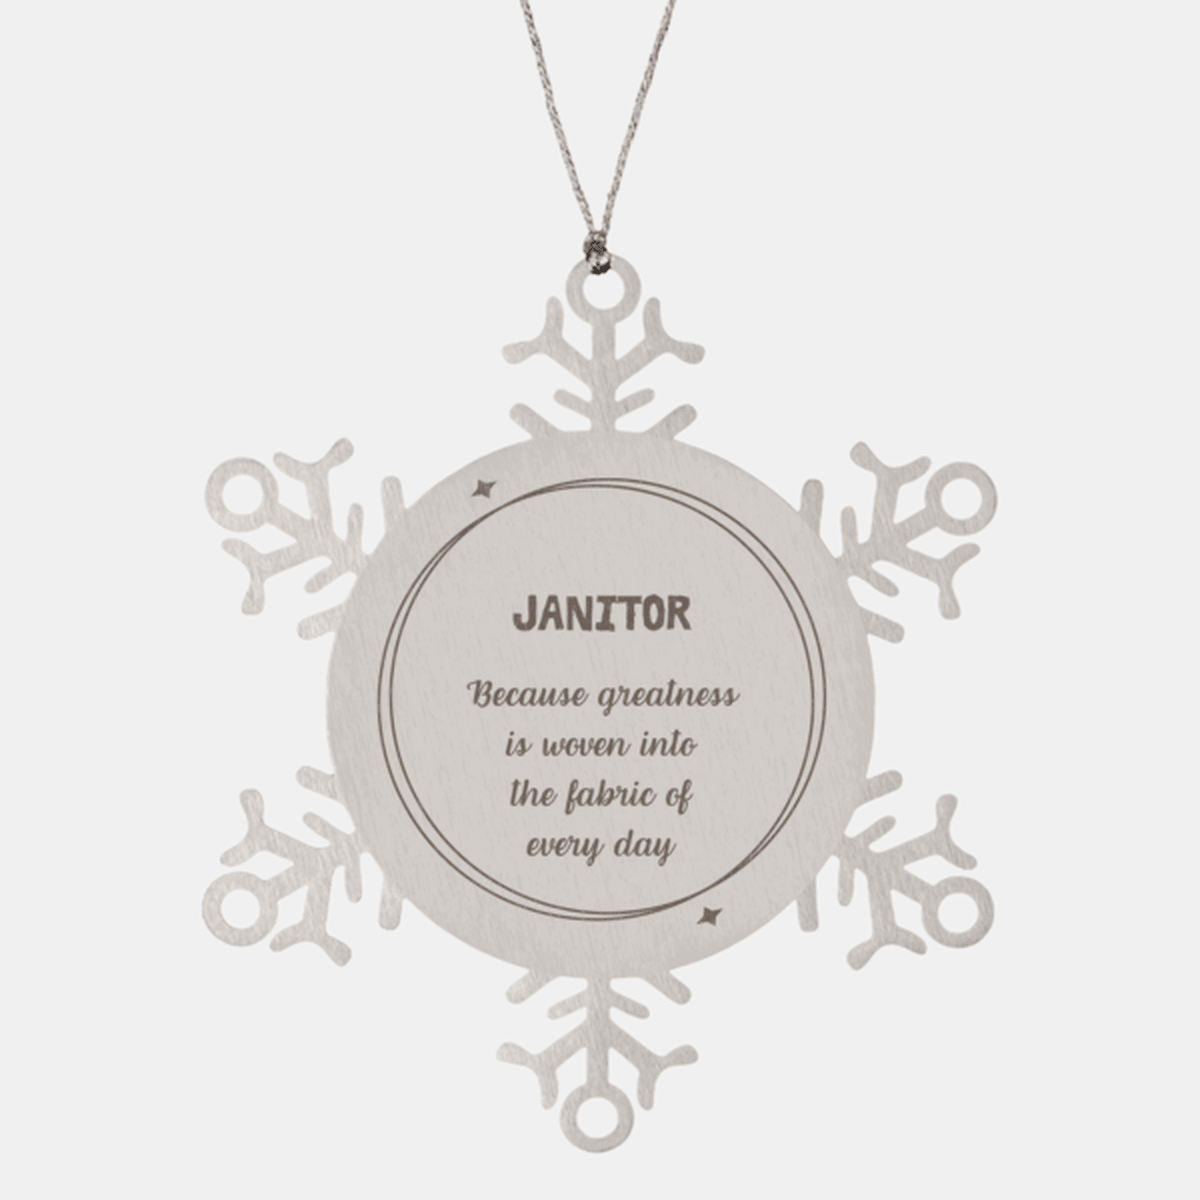 Sarcastic Janitor Snowflake Ornament Gifts, Christmas Holiday Gifts for Janitor Ornament, Janitor: Because greatness is woven into the fabric of every day, Coworkers, Friends - Mallard Moon Gift Shop